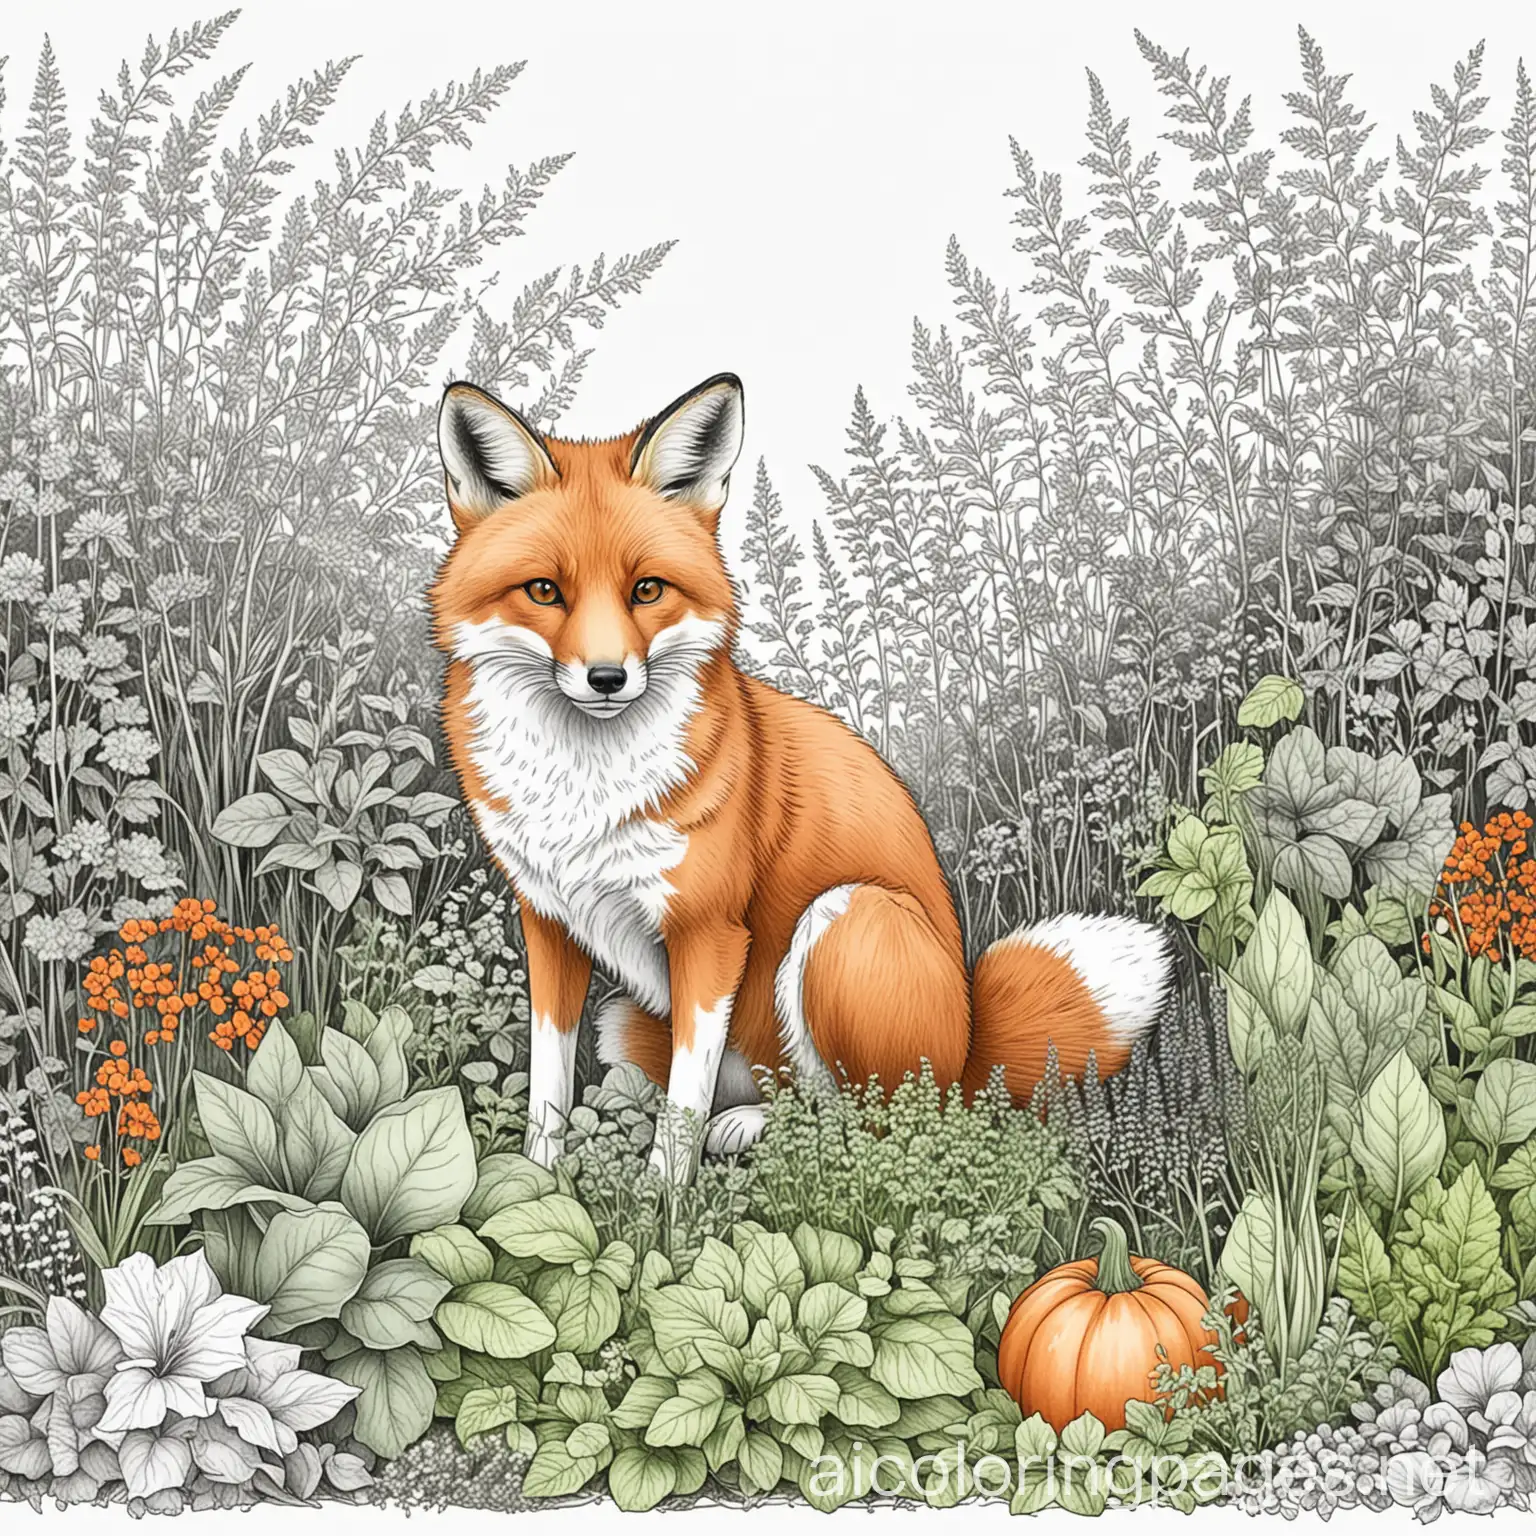 a sweet fox named BoBo sitting in a garden of herbs and vegetables, Coloring Page, black and white, line art, white background, Simplicity, Ample White Space. The background of the coloring page is plain white to make it easy for young children to color within the lines. The outlines of all the subjects are easy to distinguish, making it simple for kids to color without too much difficulty